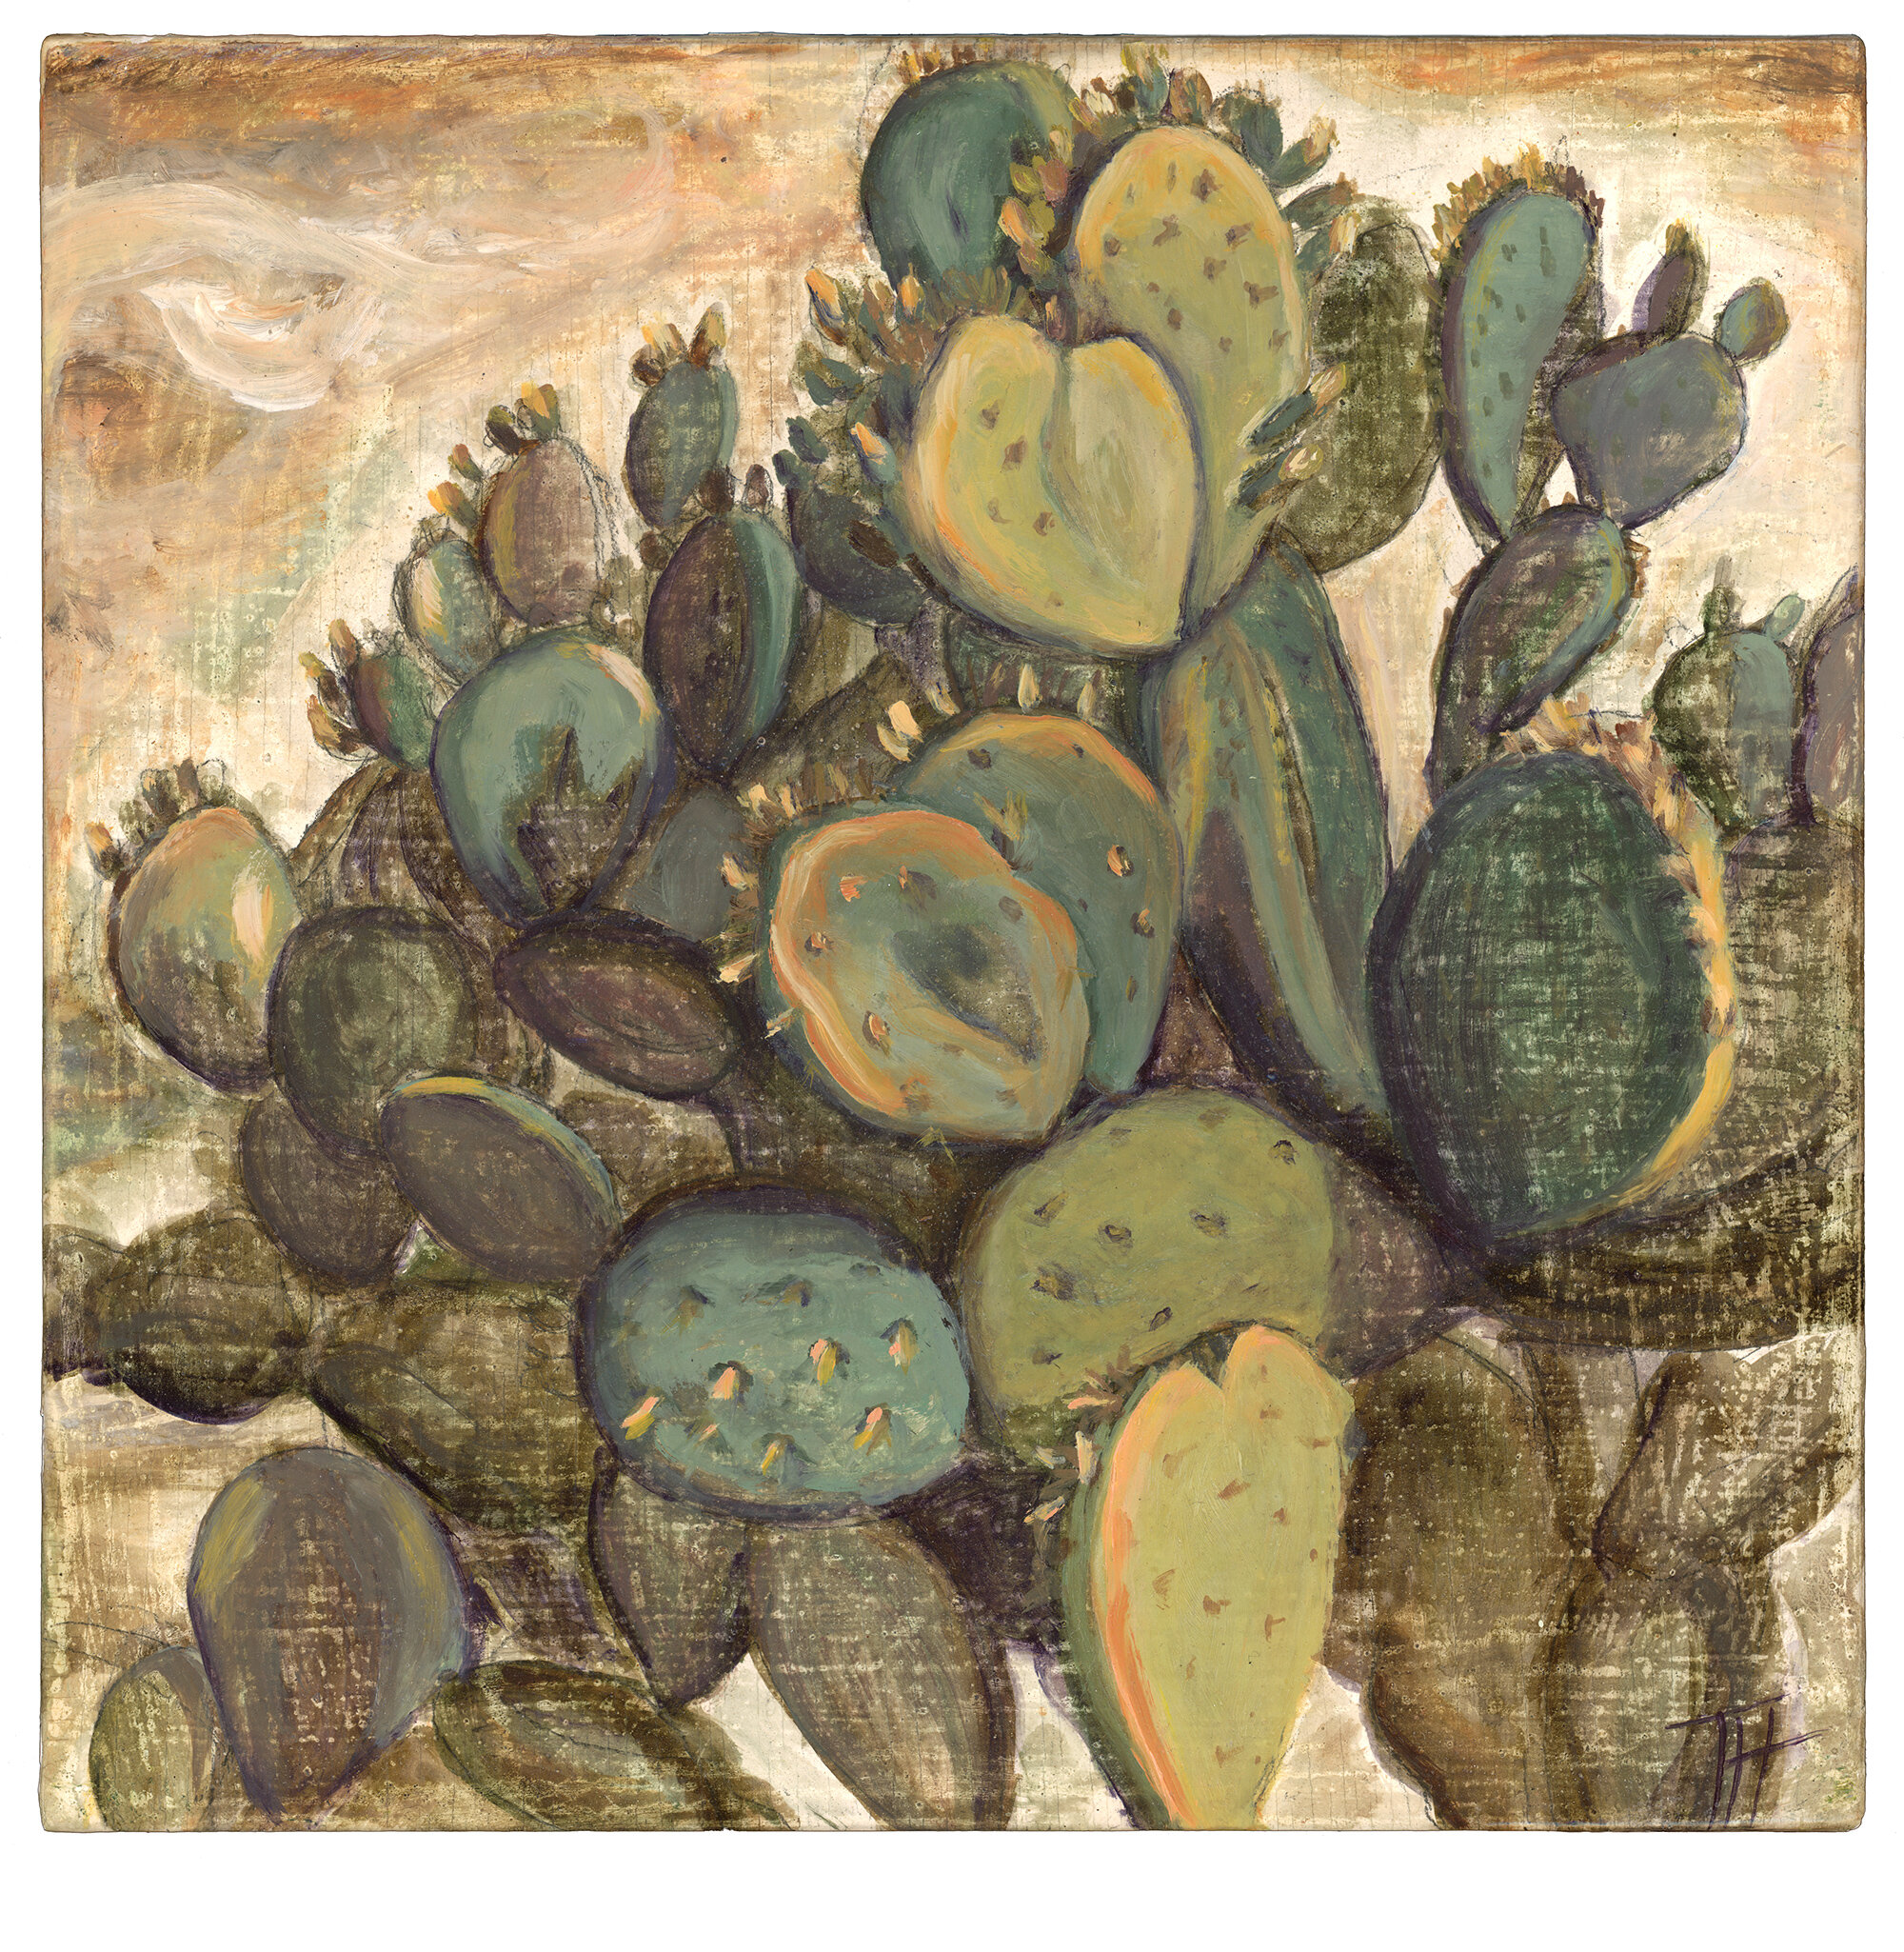  Mexican Cactus (2), 2019. 10x10 in. Oil on wood. 